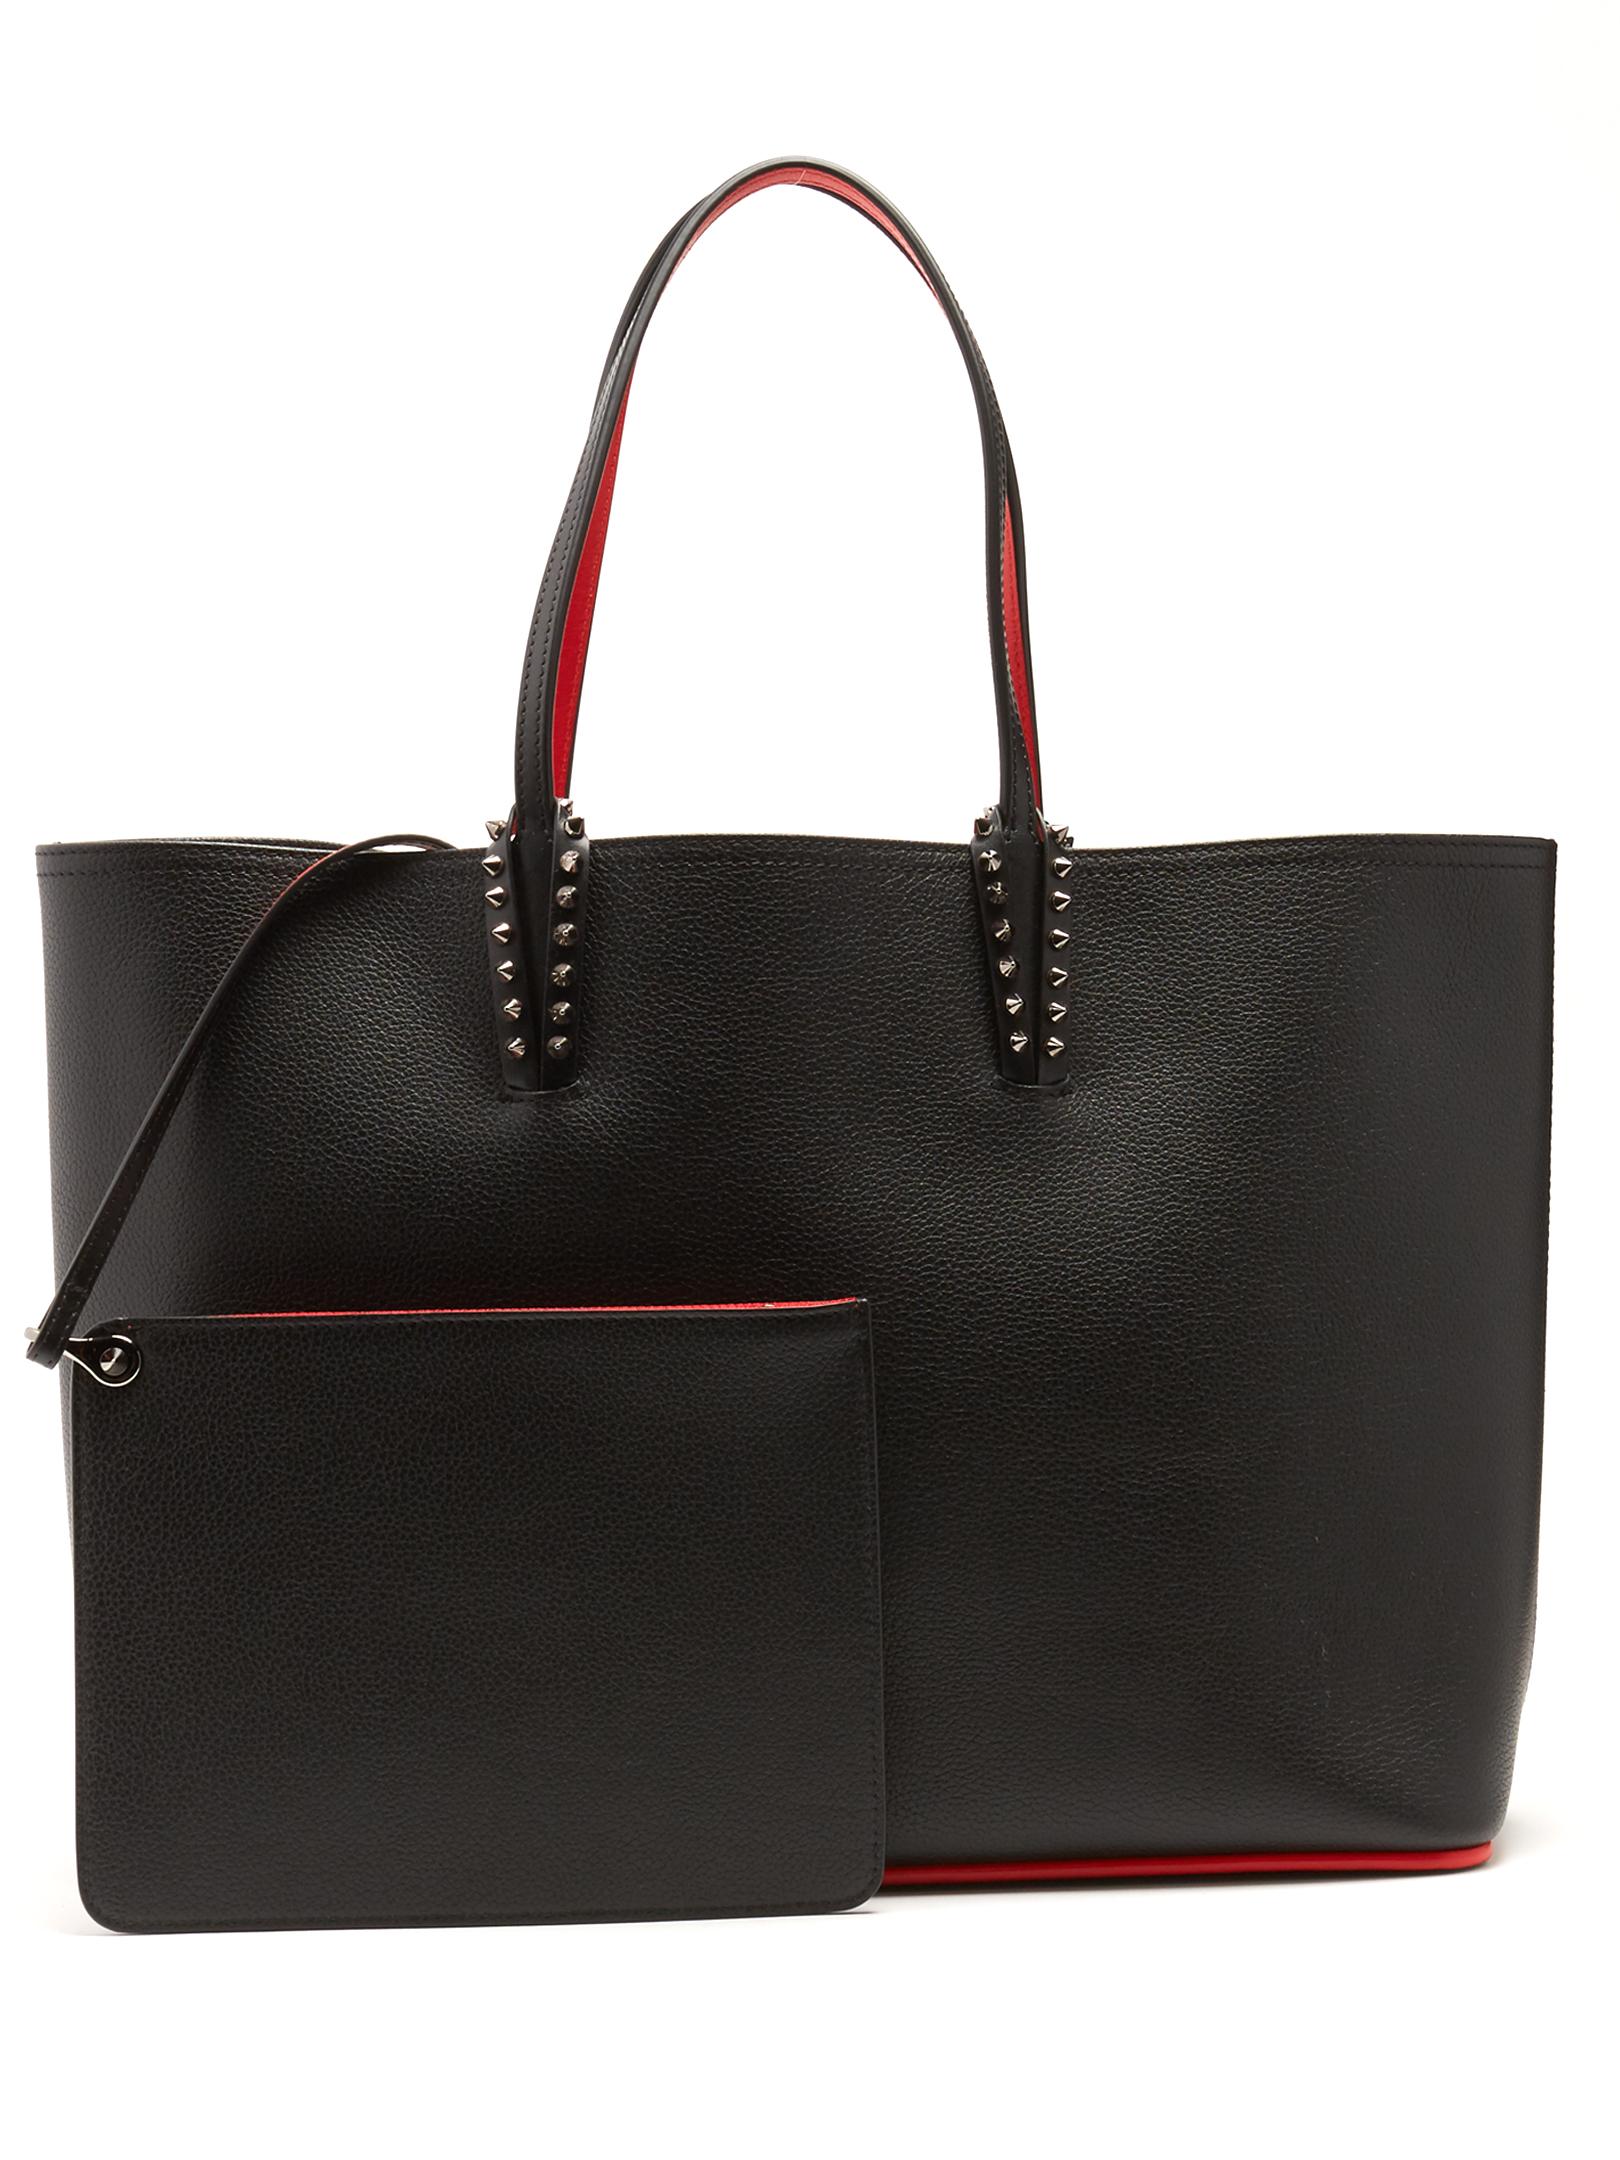 Lyst - Christian louboutin Cabata Spike-embellished Leather Tote in ...